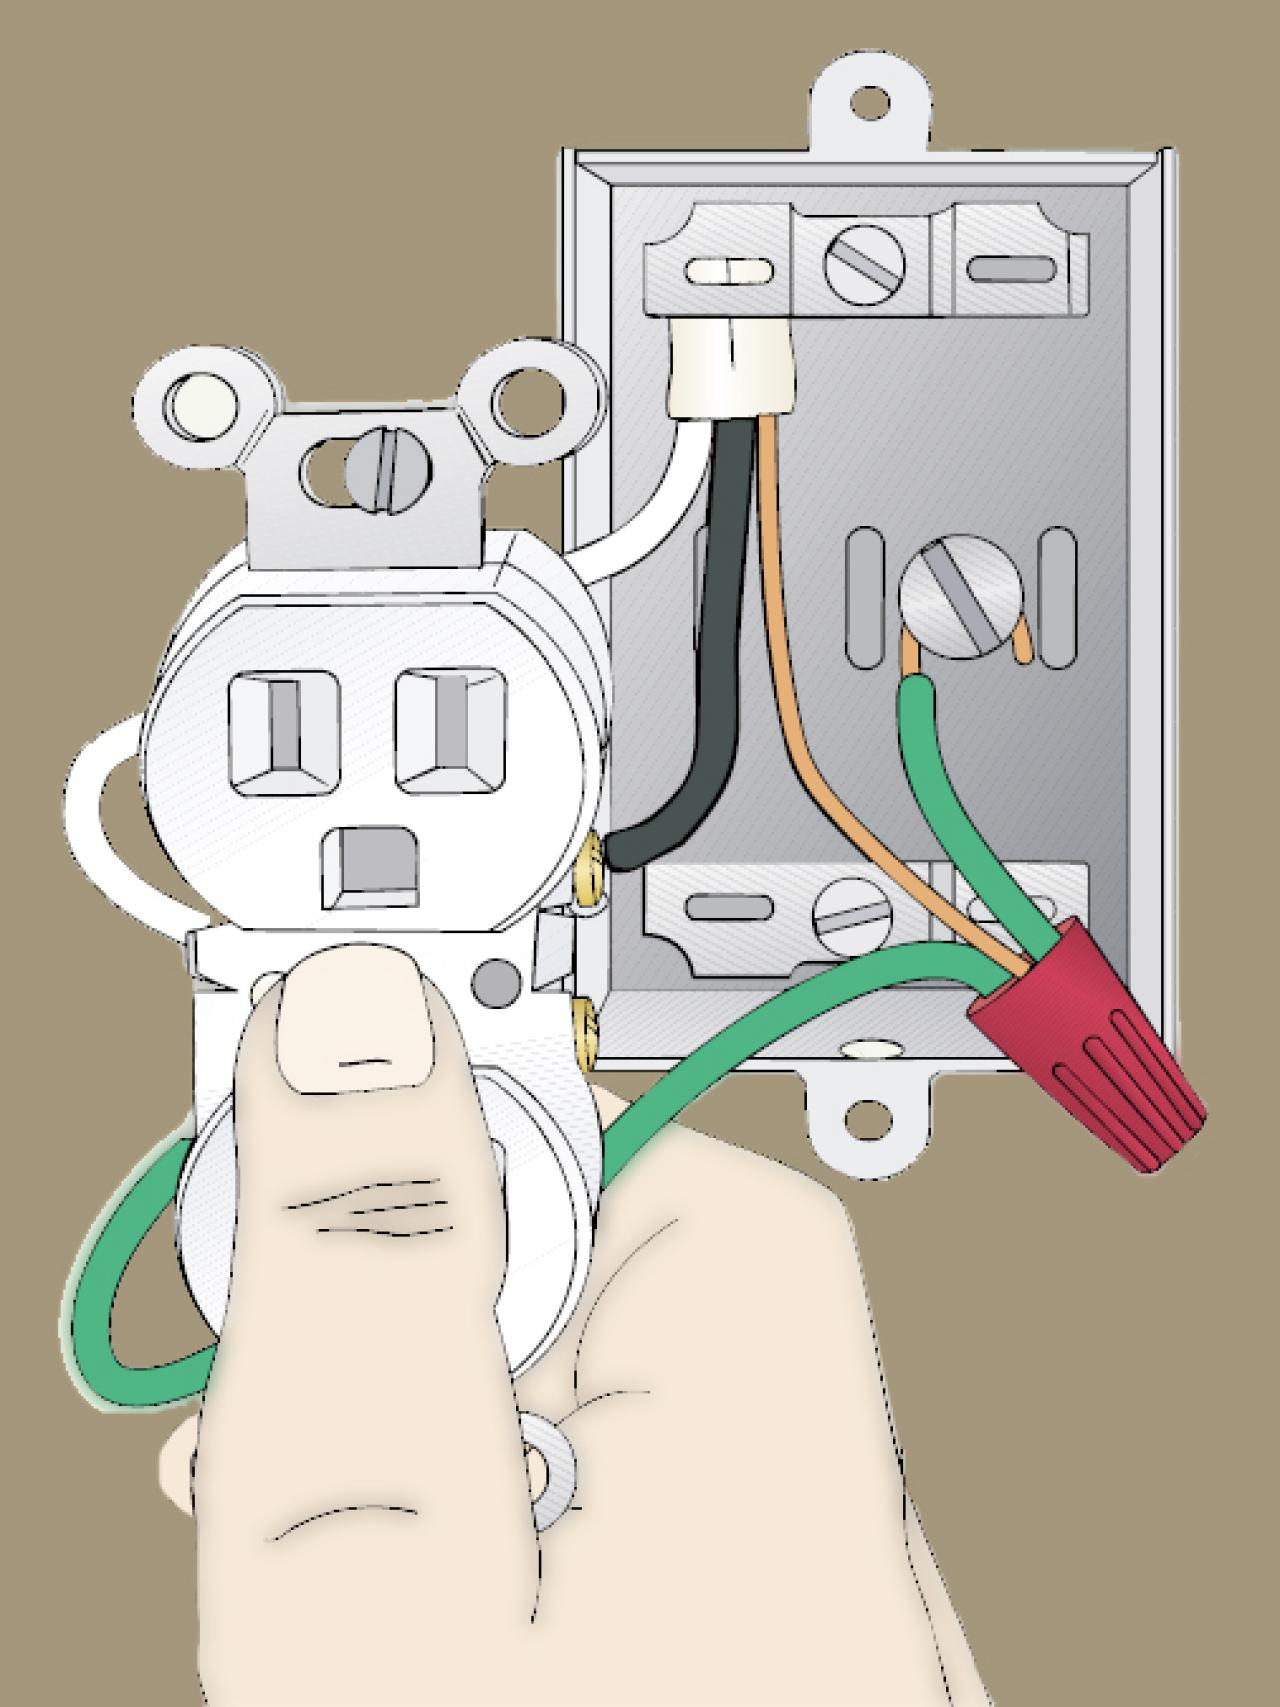 The Diffe Colored Electrical Wires, How To Test Old House Wiring